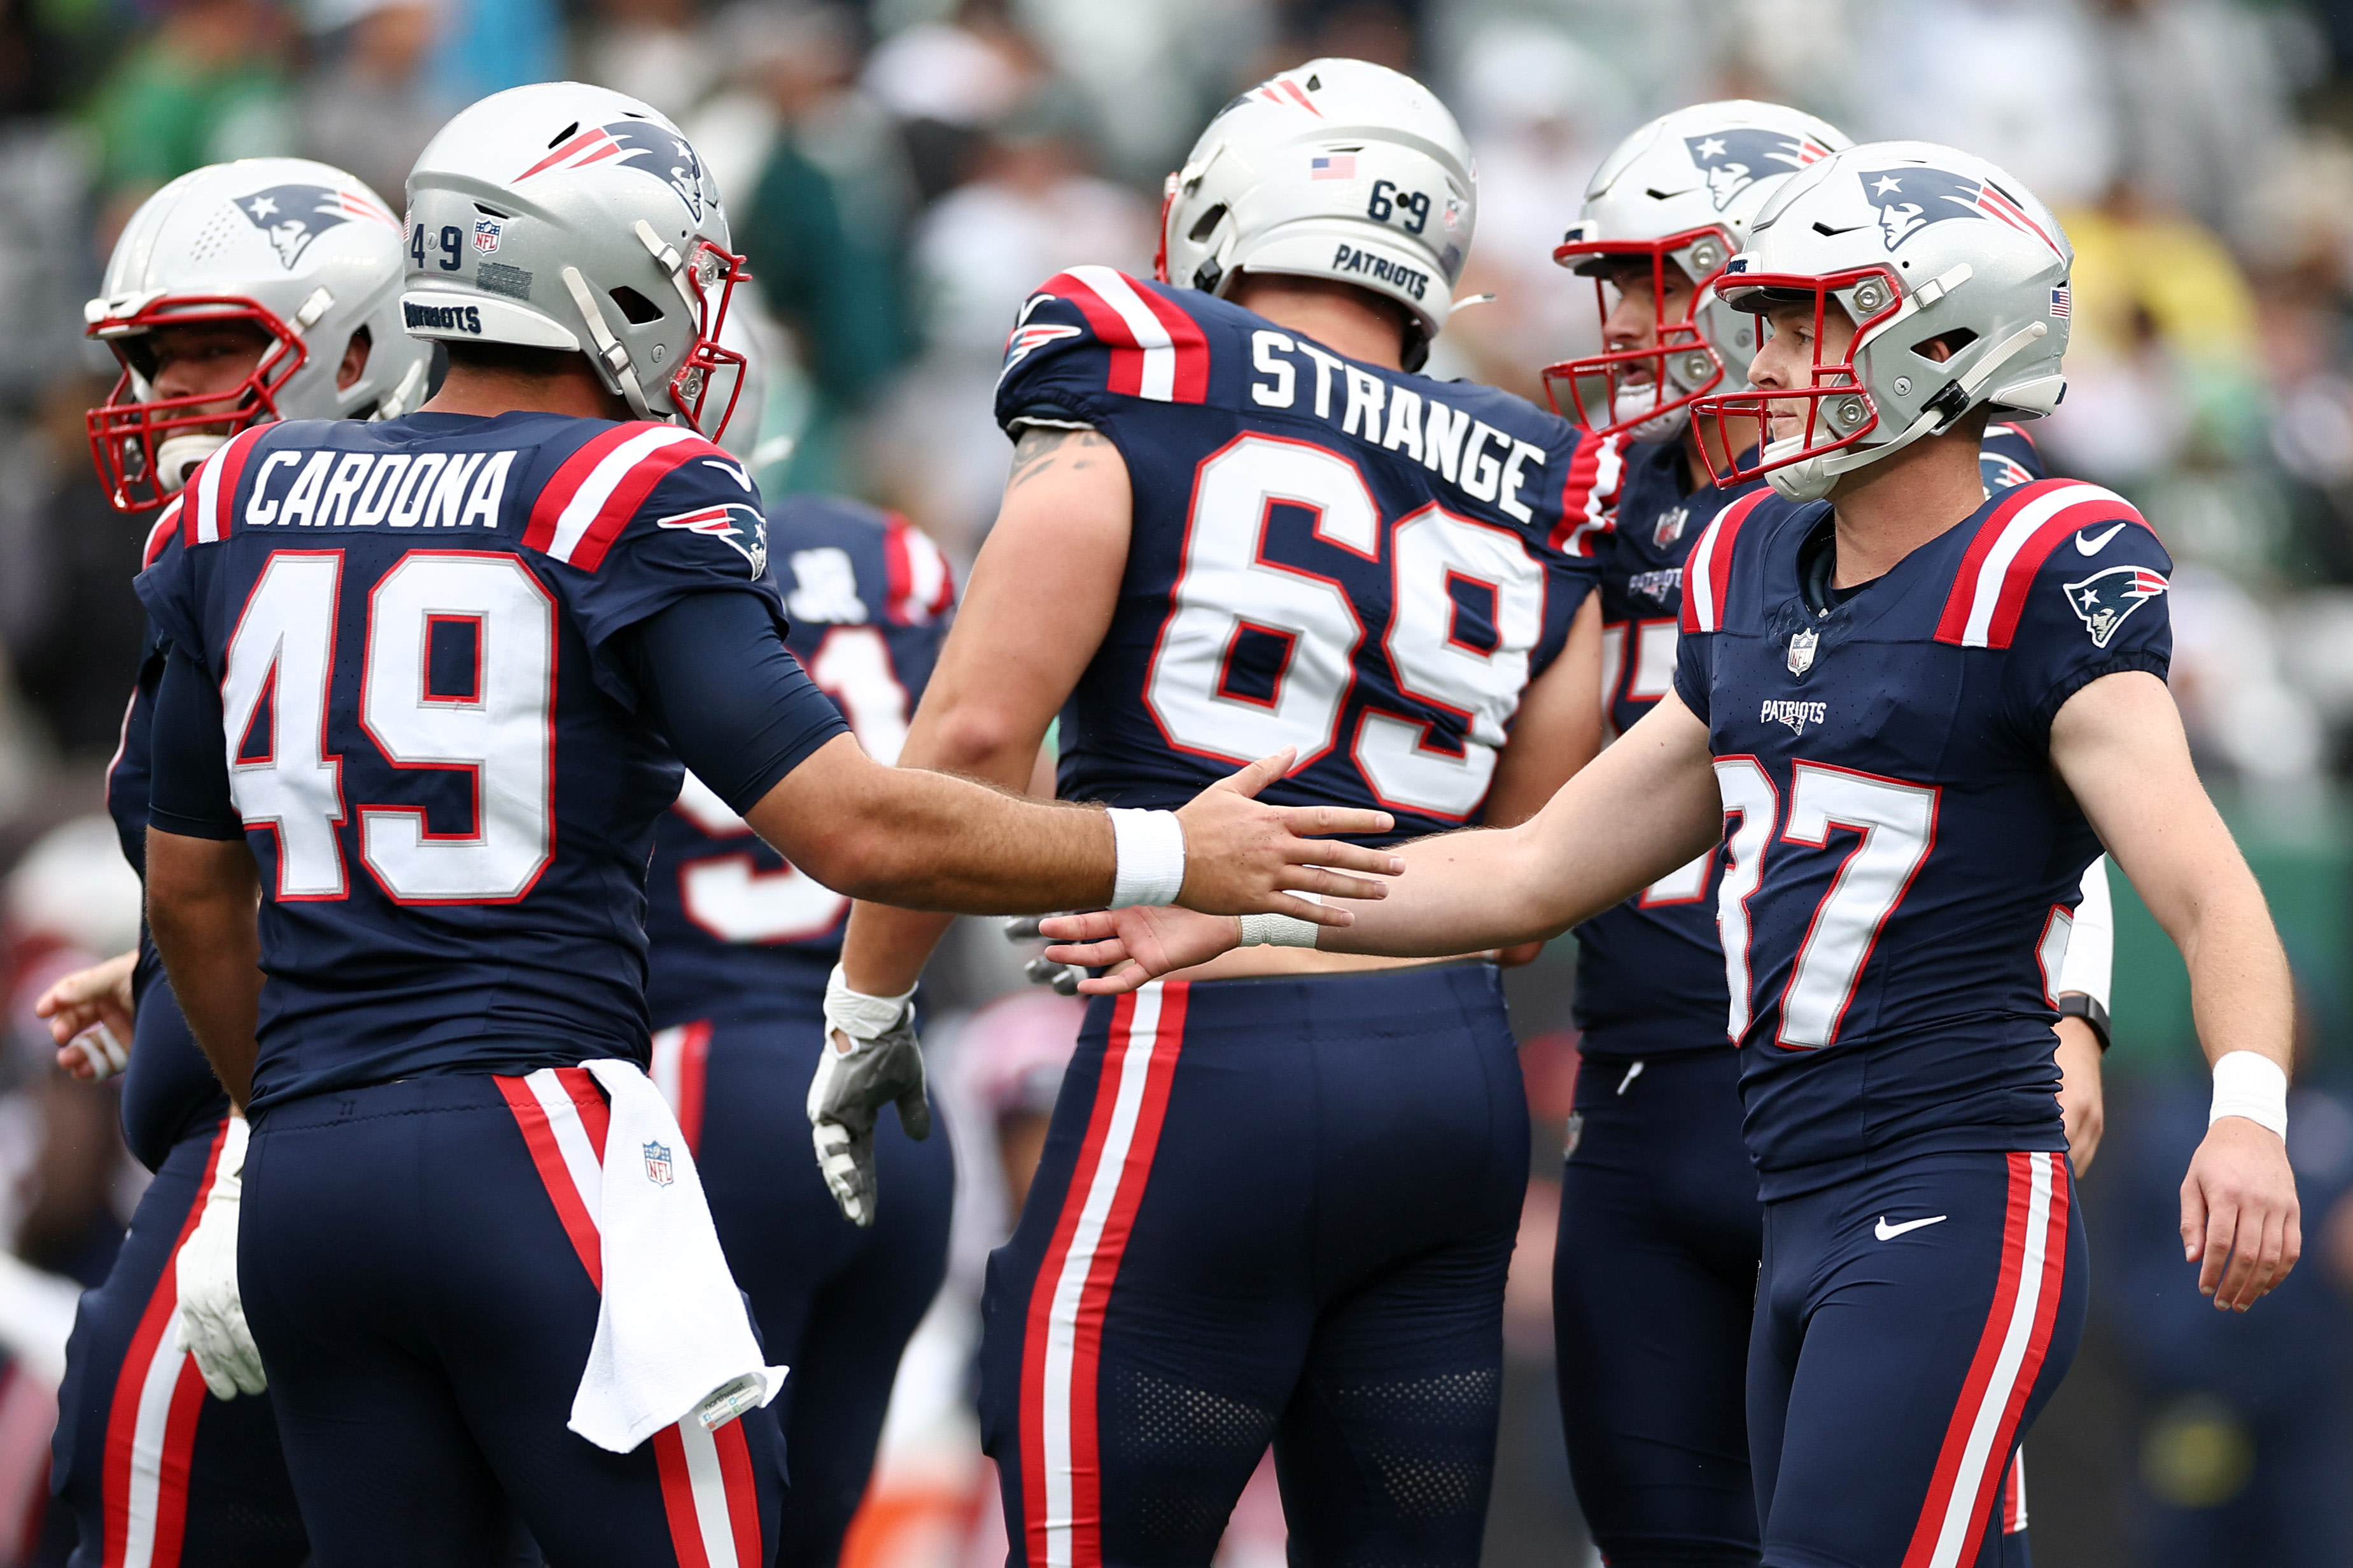 How to watch the Patriots' game against the Jets - Pats Pulpit